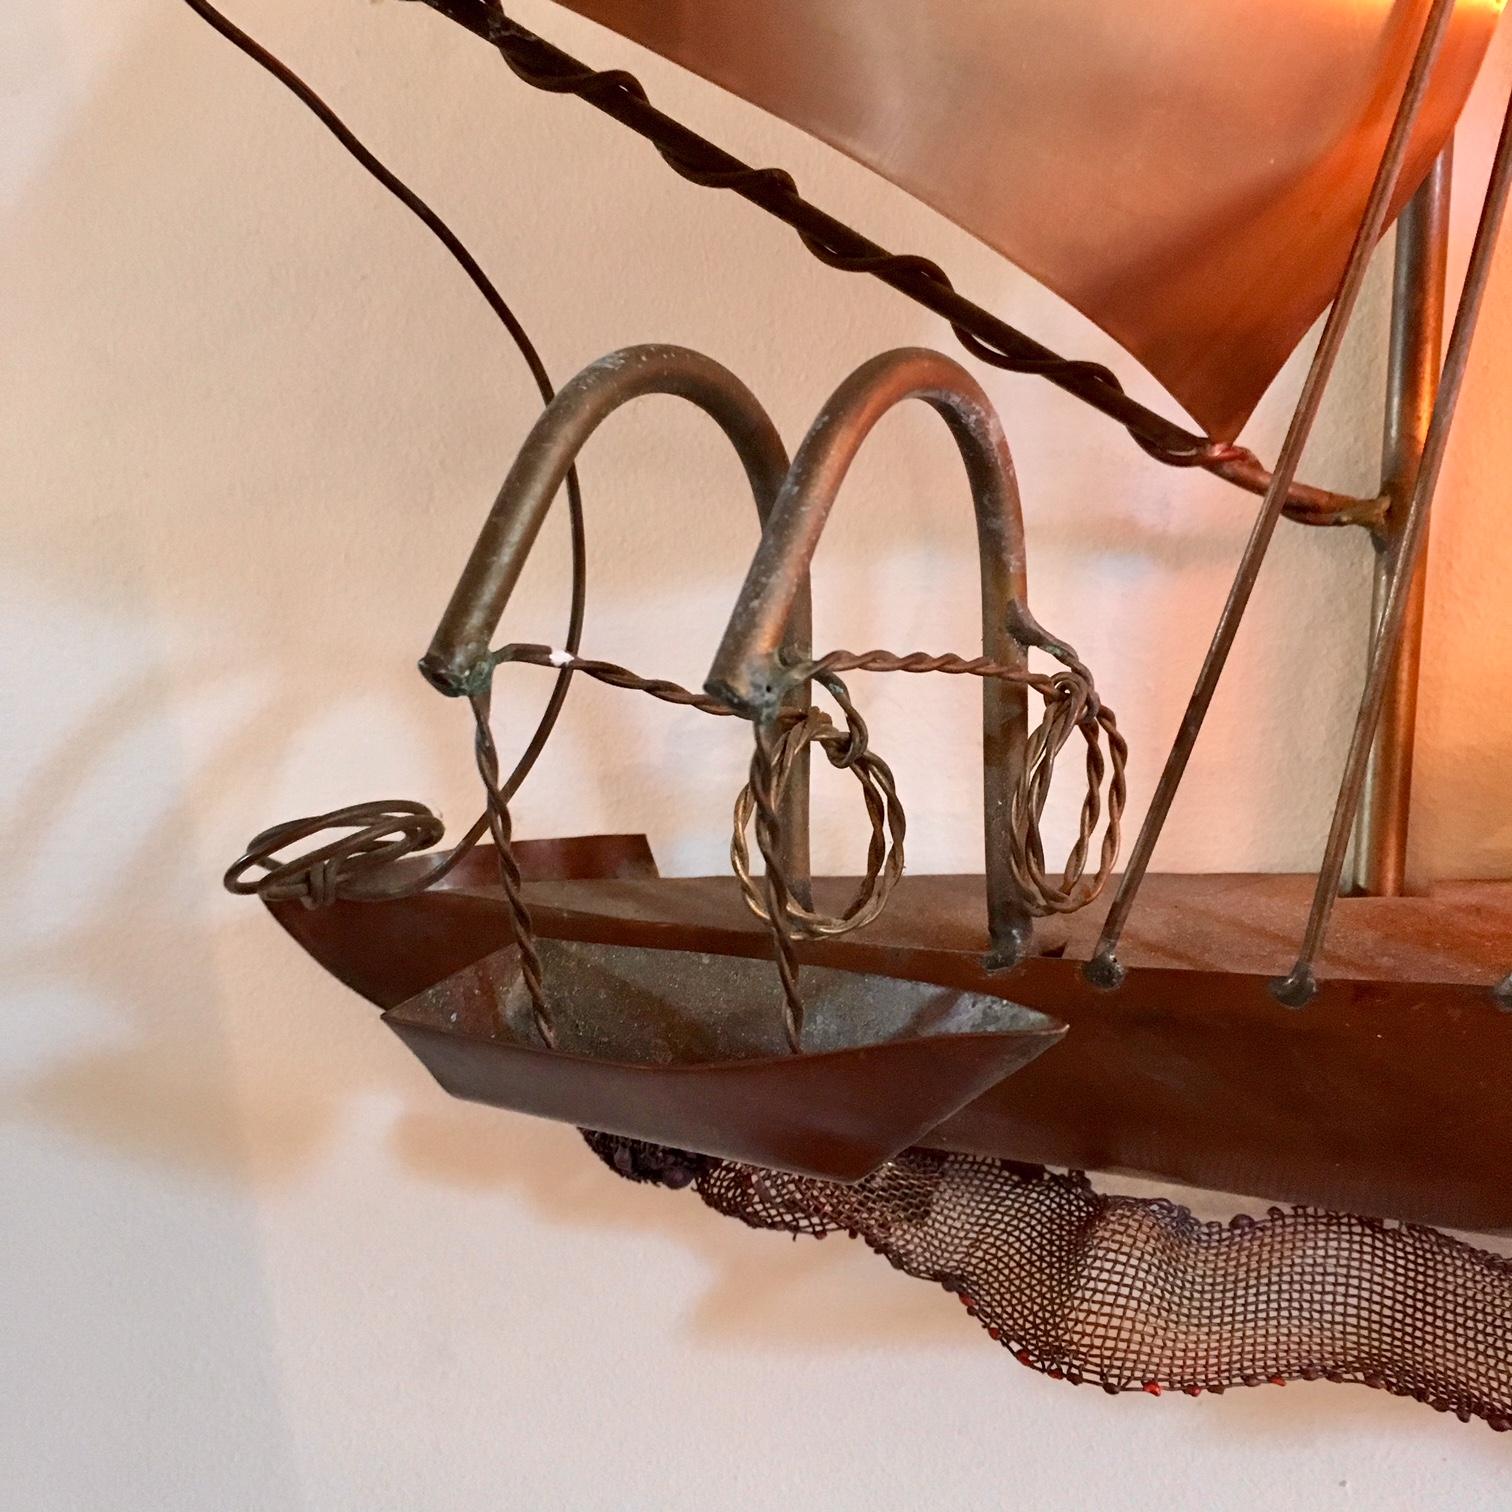 Belgian Mid-Century Modern Sailing Boat Wall Light or Sculpture by Daniel d'Haeseleer For Sale